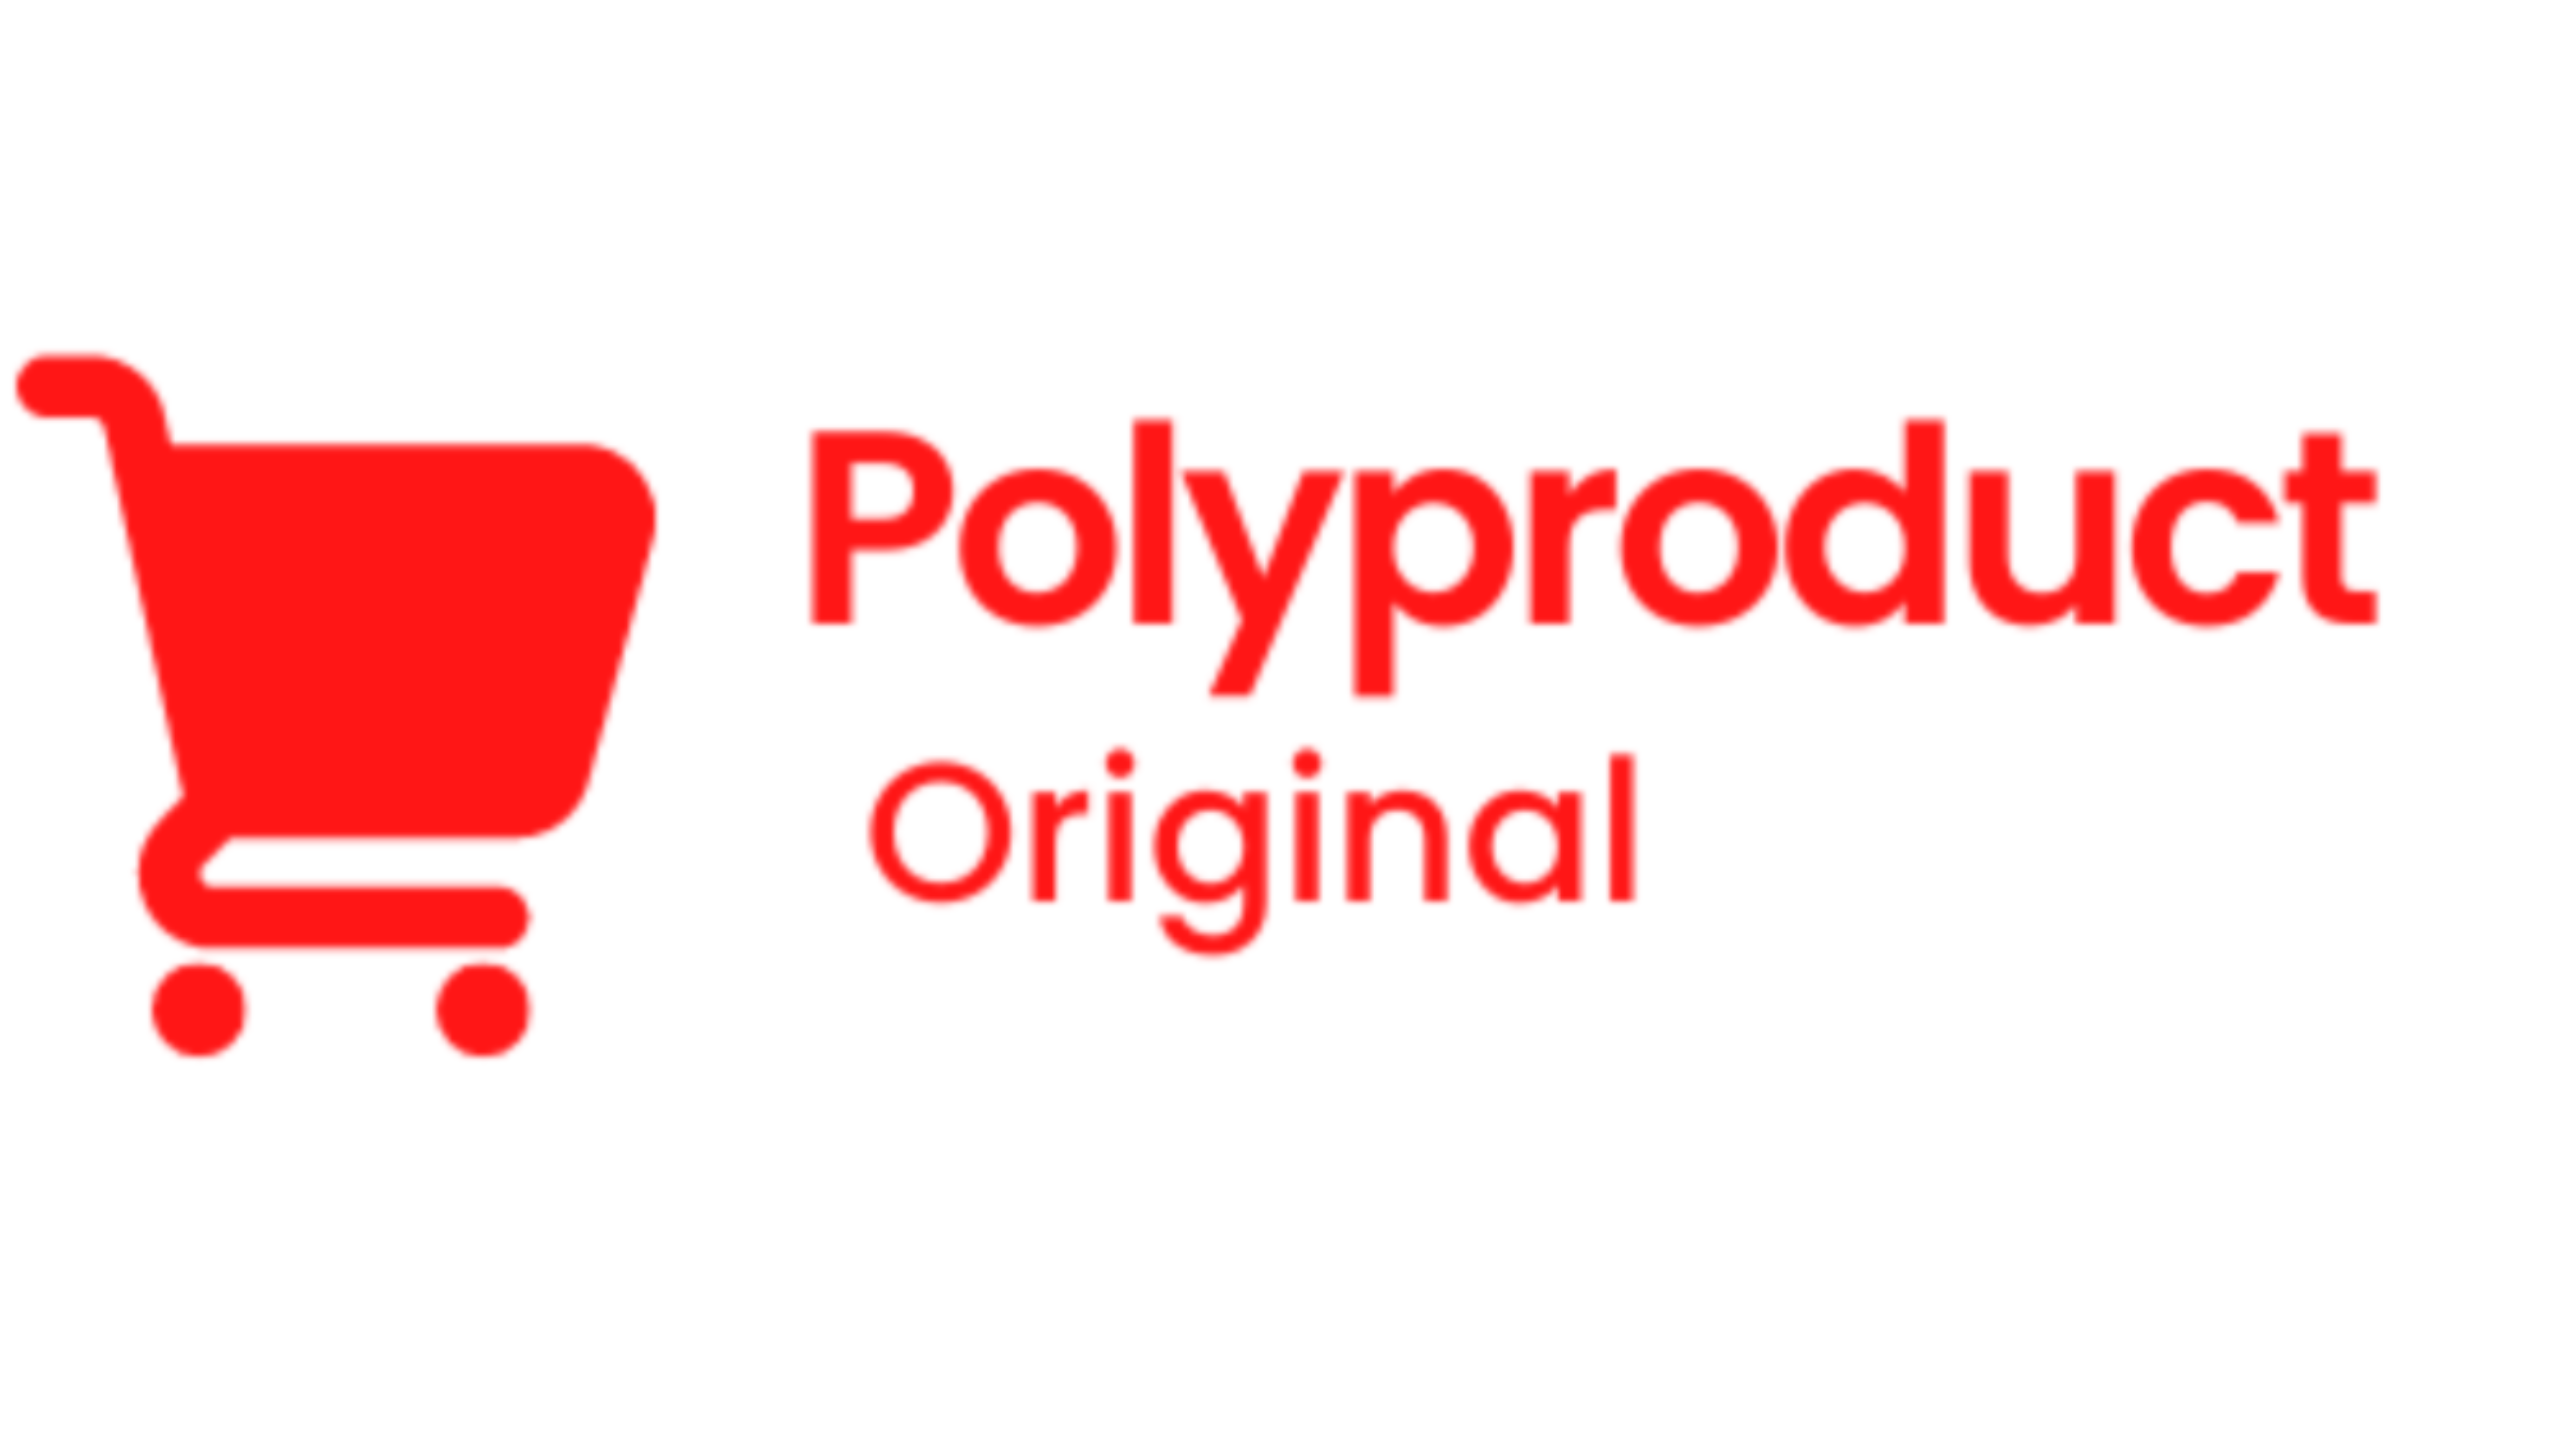 Polyproduct